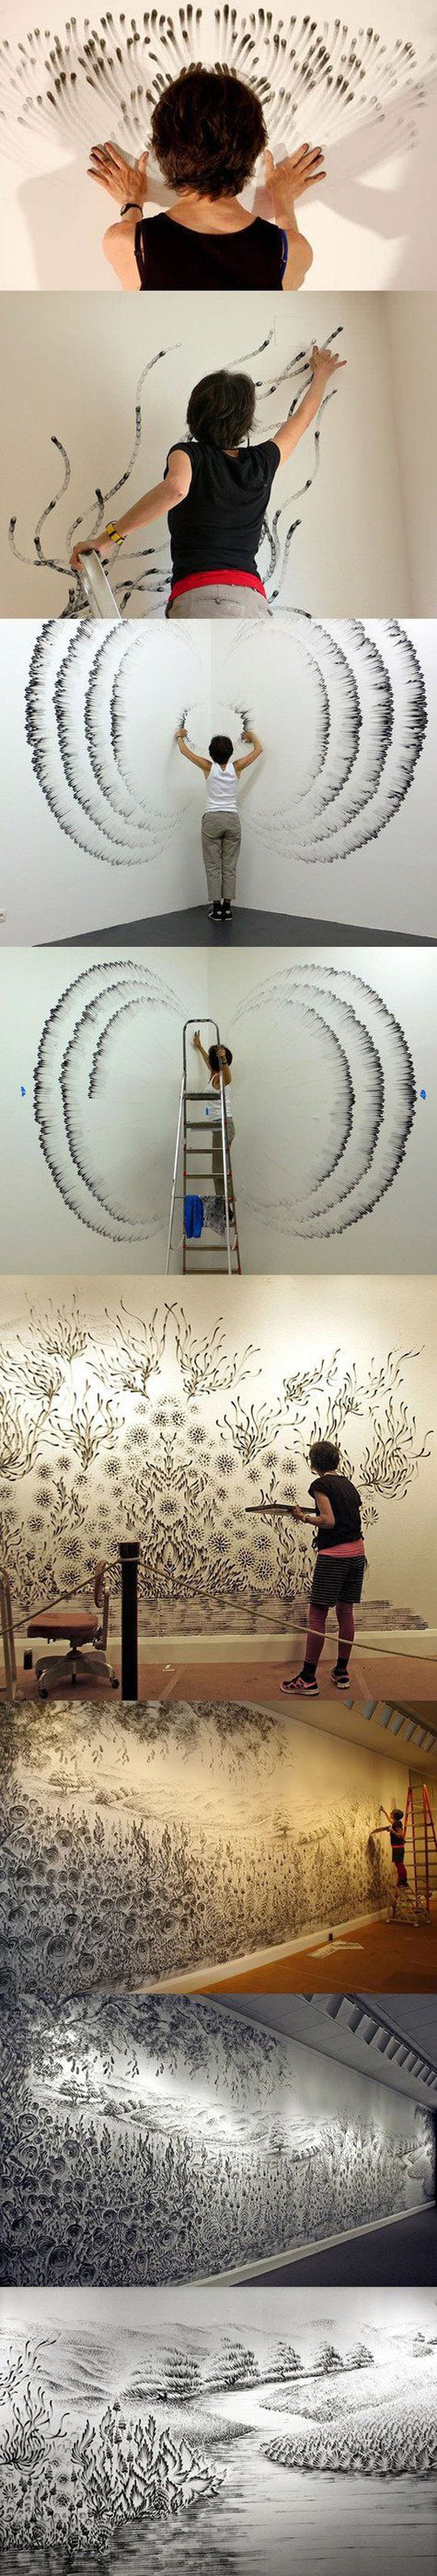 funny-finger-paint-hands-wall